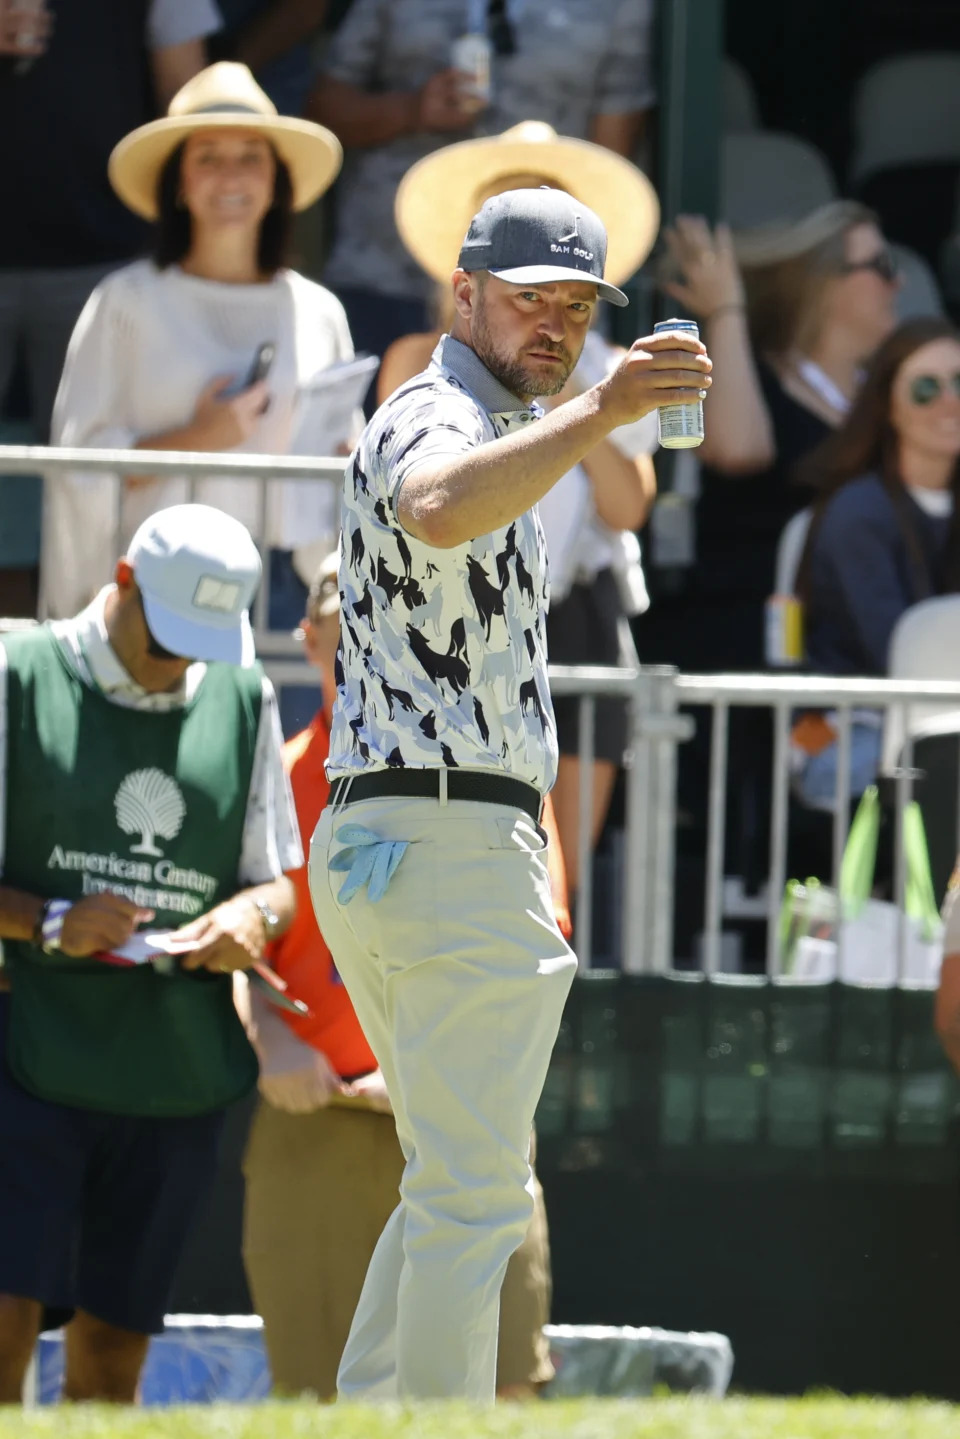 A man holding a drink at an outdoor event dressed in a patterned golf shirt, white pants, and a cap, with a crowd in the background, including one person wearing a hat